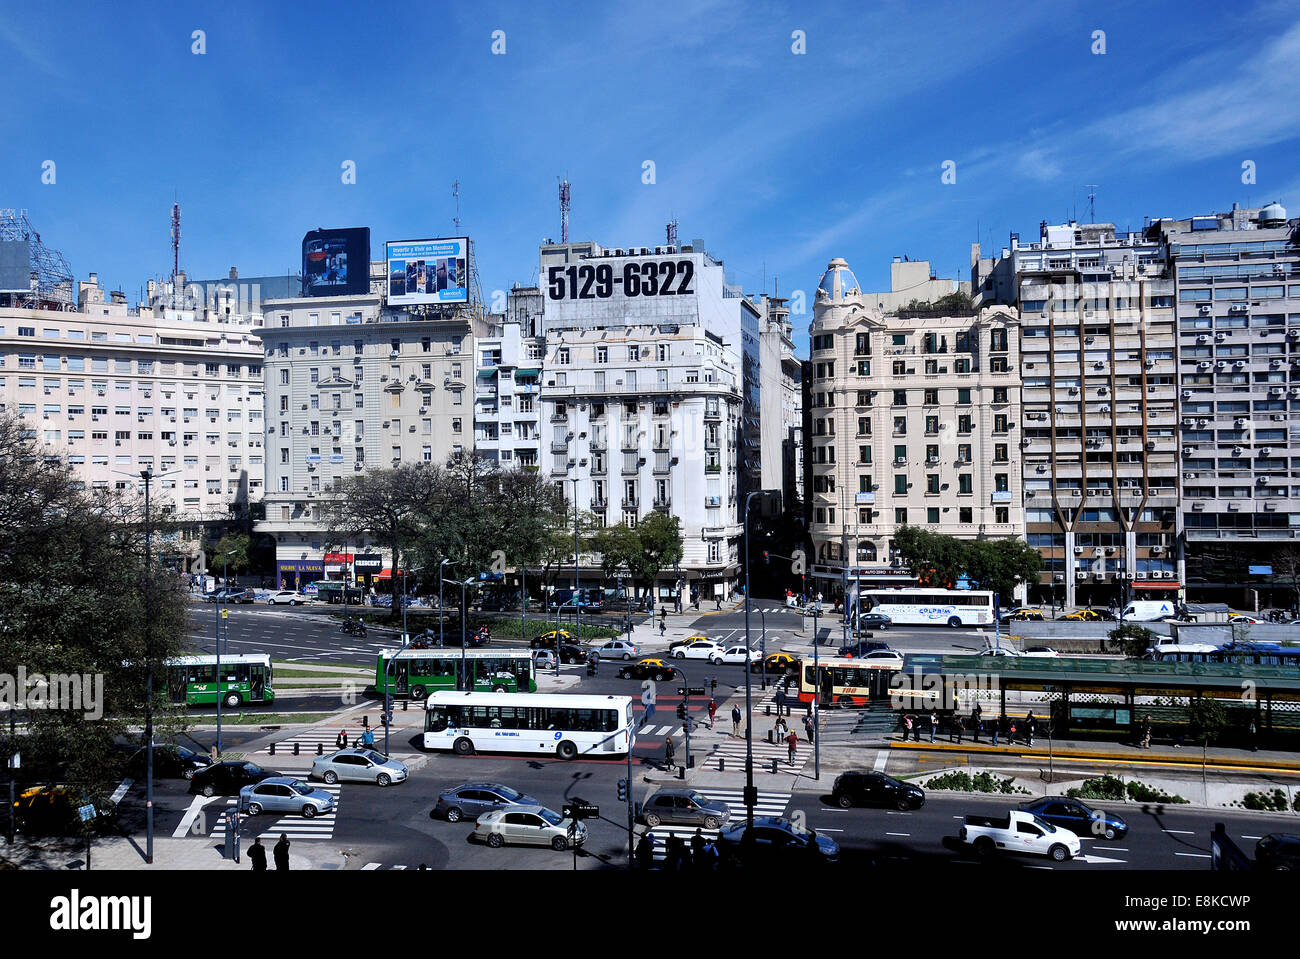 9 july avenue Buenos Aires Argentina Stock Photo